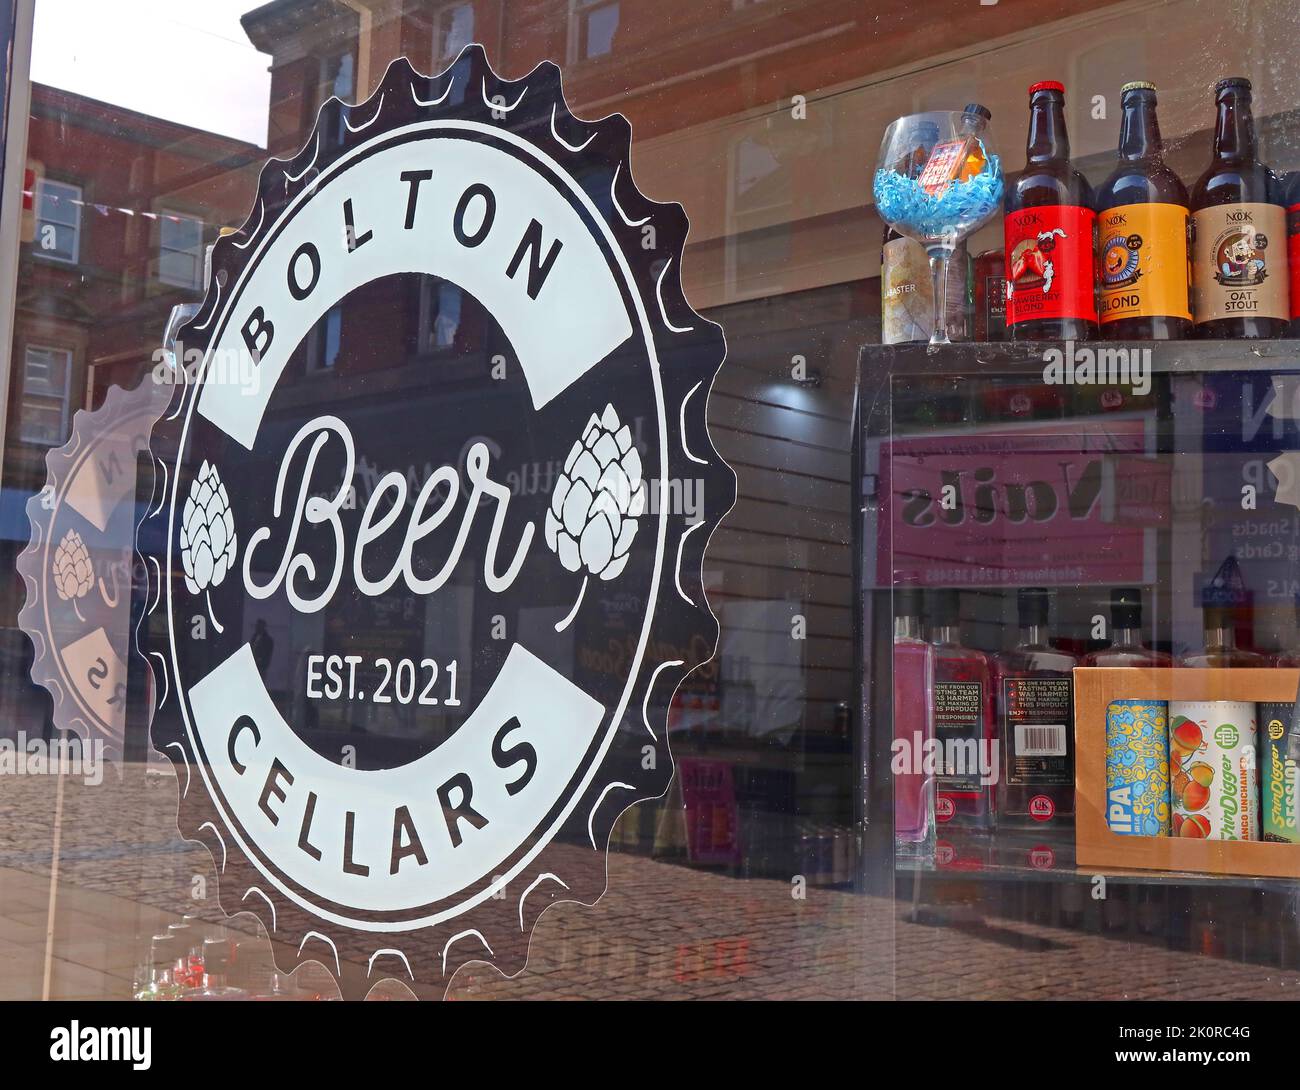 Bolton Beer Cellars, est 2021, 22 Corporation St, Bolton, Greater Manchester, England, UK,  BL1 2AN Stock Photo